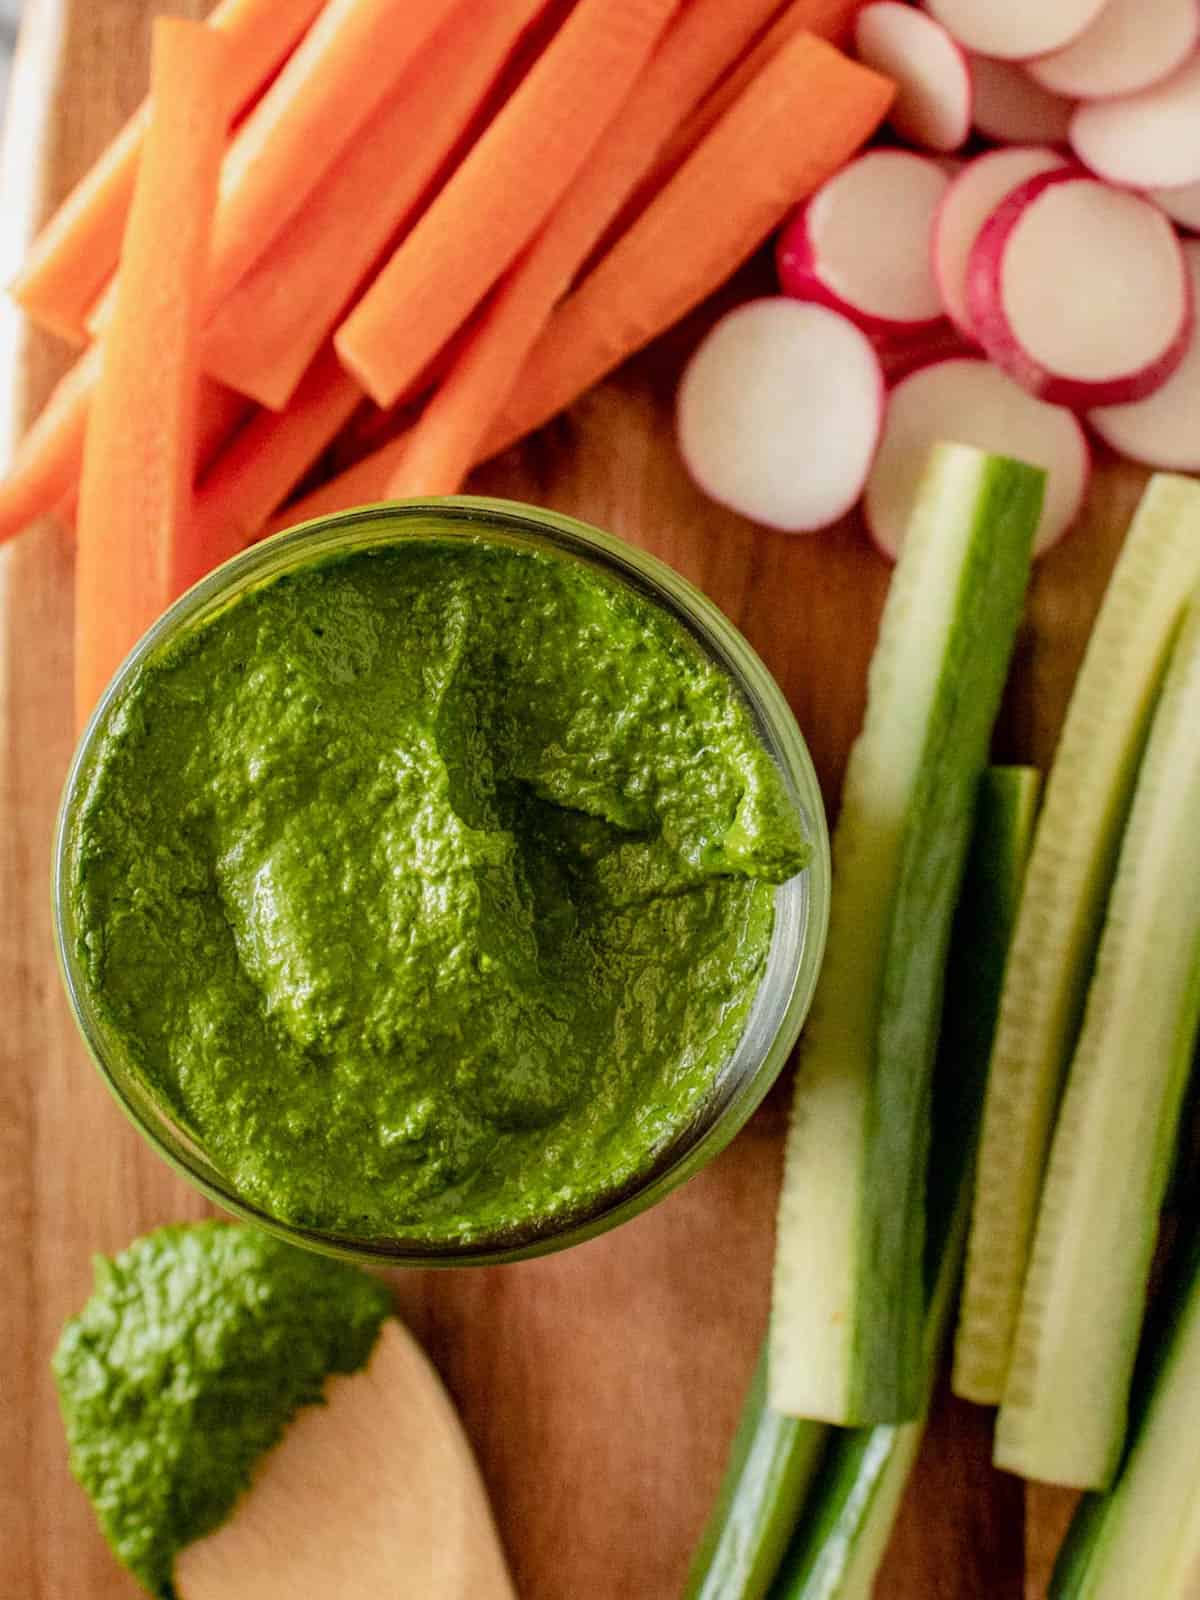 Green tahini sauce in a jar with carrots, radishes, and cucumbers.